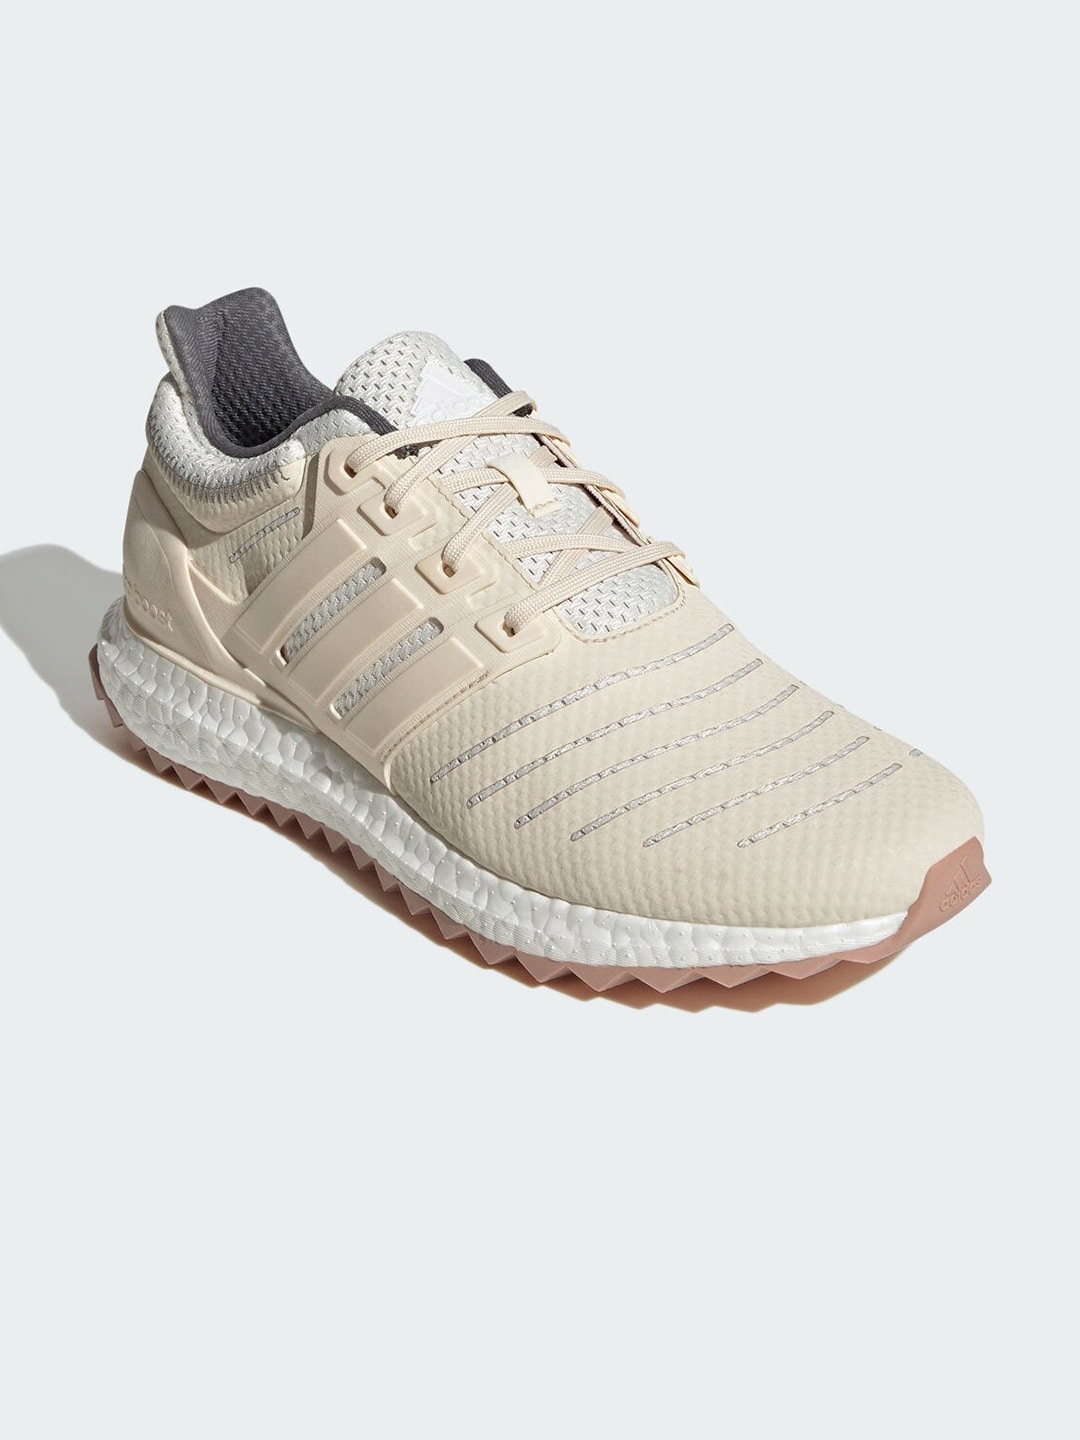 ADIDAS UB DNA URBAN Self-Design Running Sports Shoes Price in India